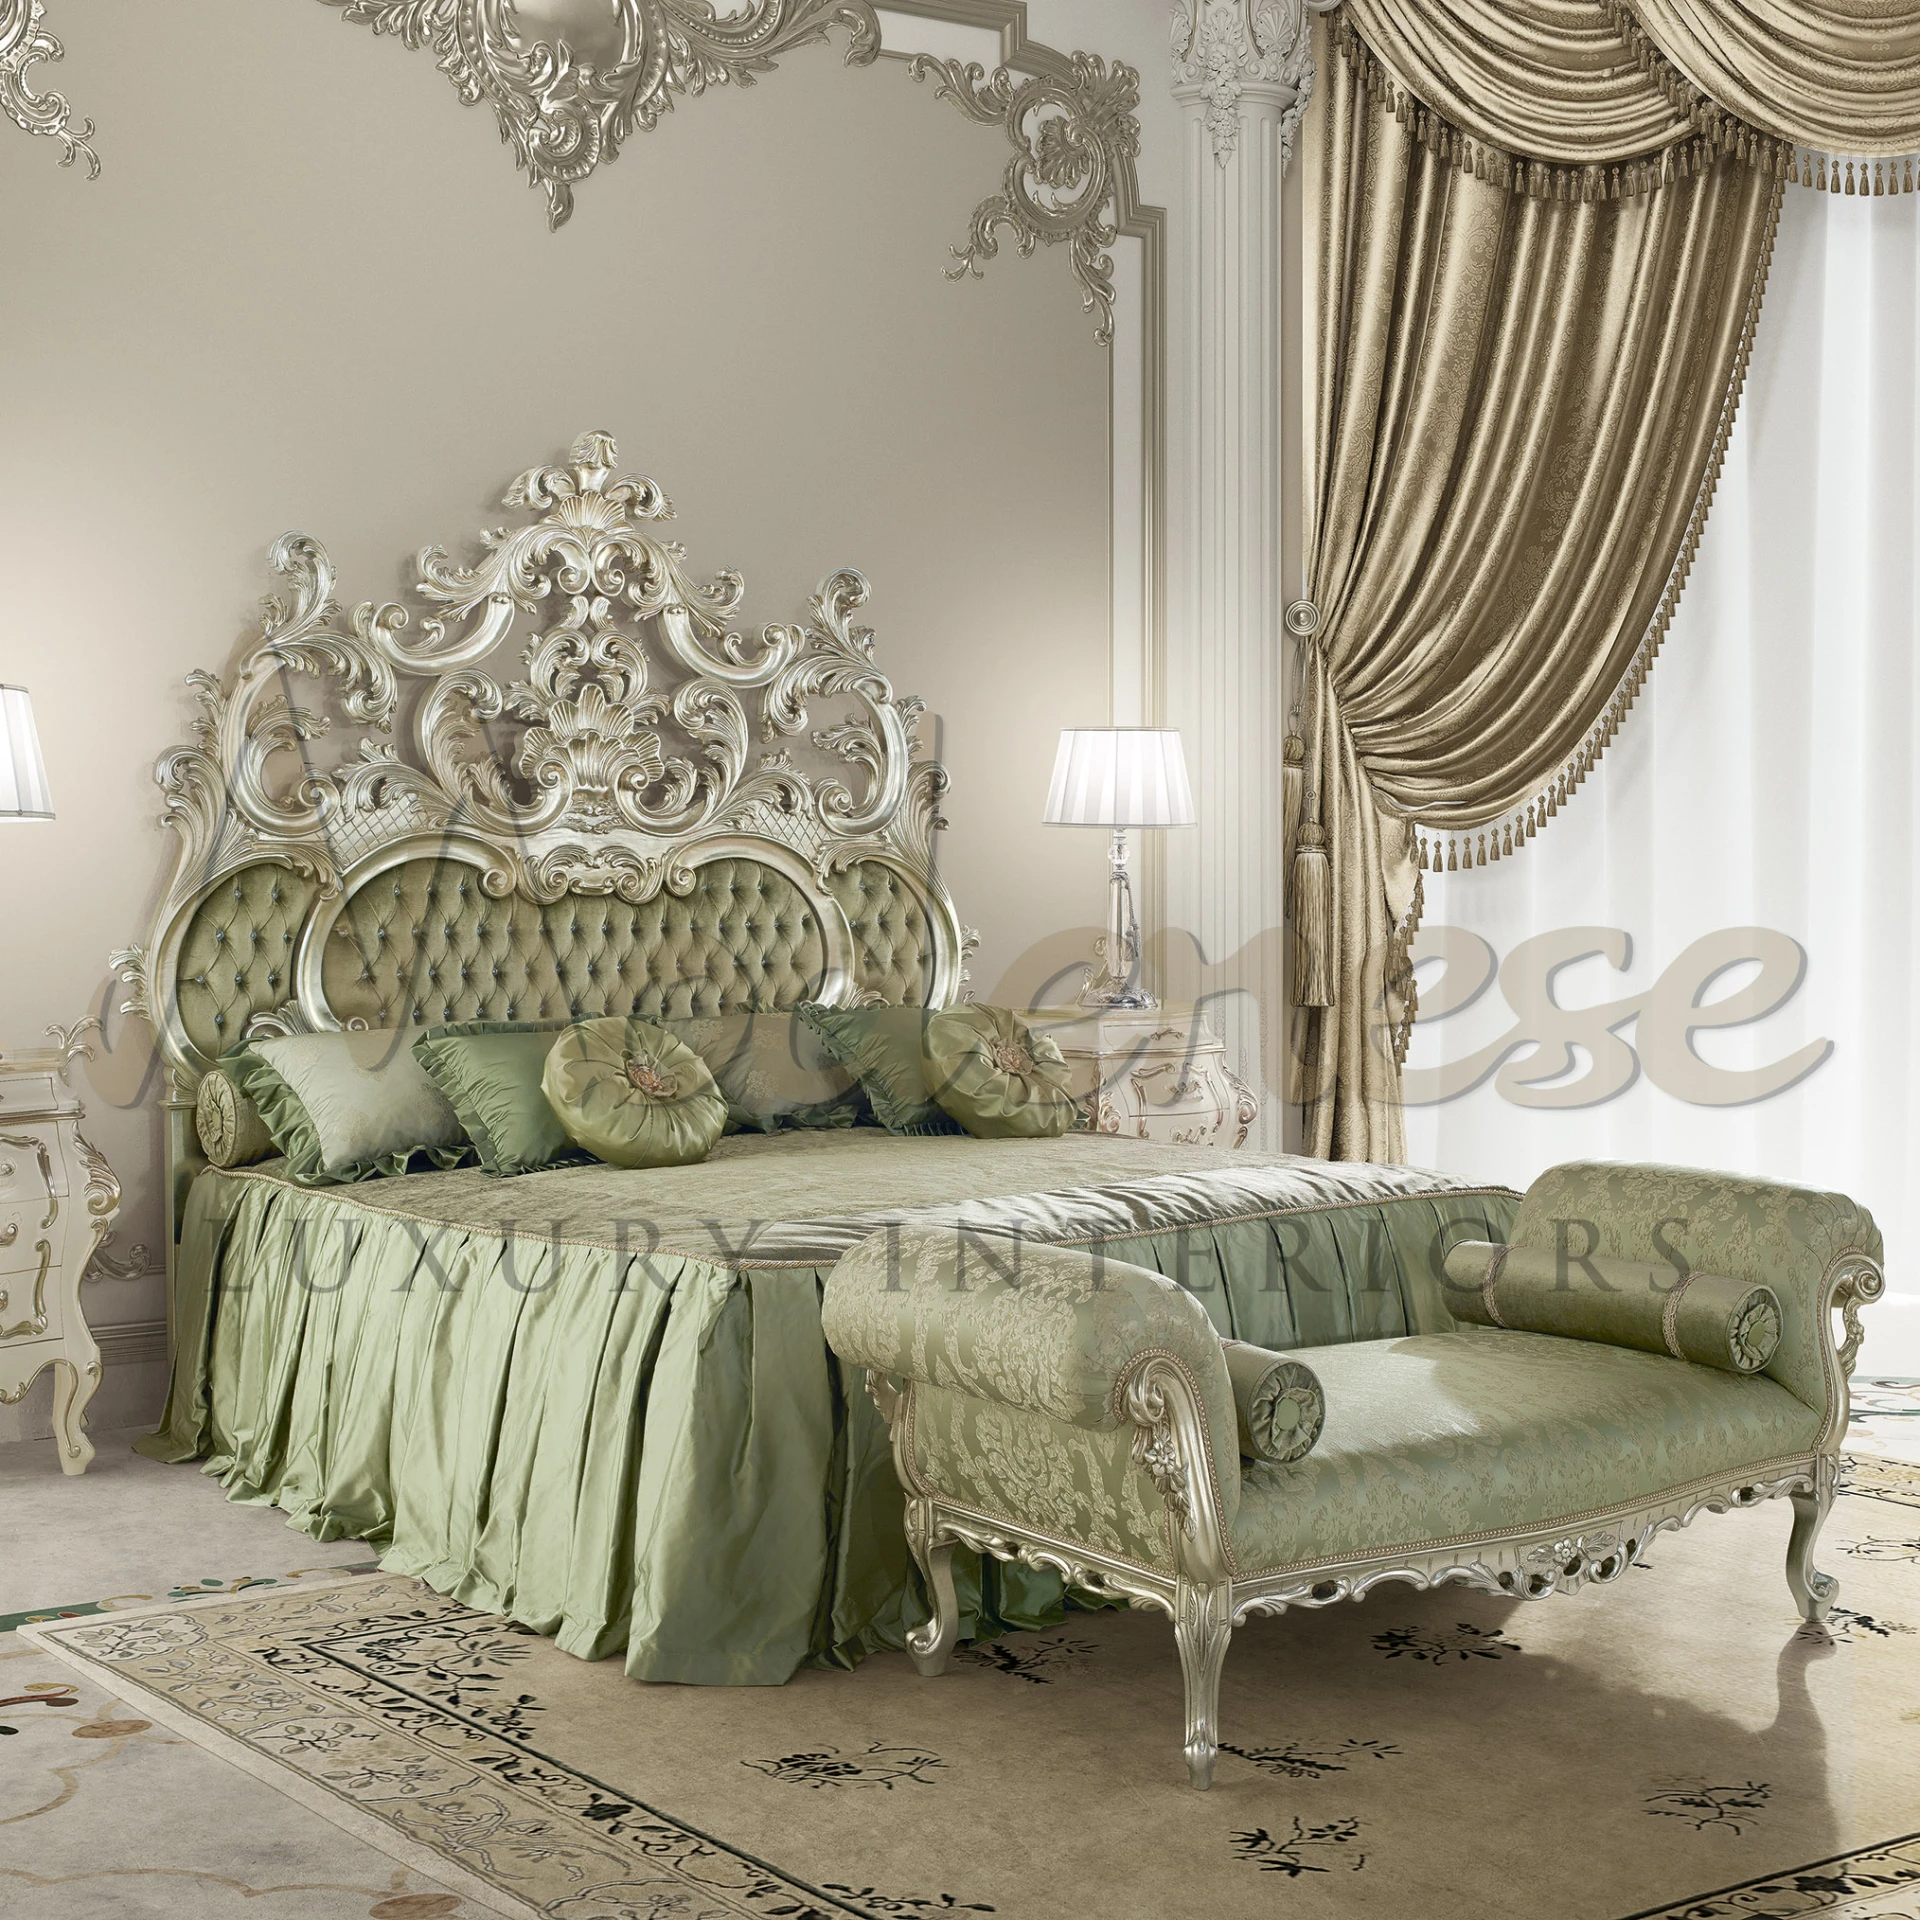 A luxurious bedroom featuring a statement bed with an ornate, sculpted headboard that has detailed carvings and is finished in a glossy, metallic tone.